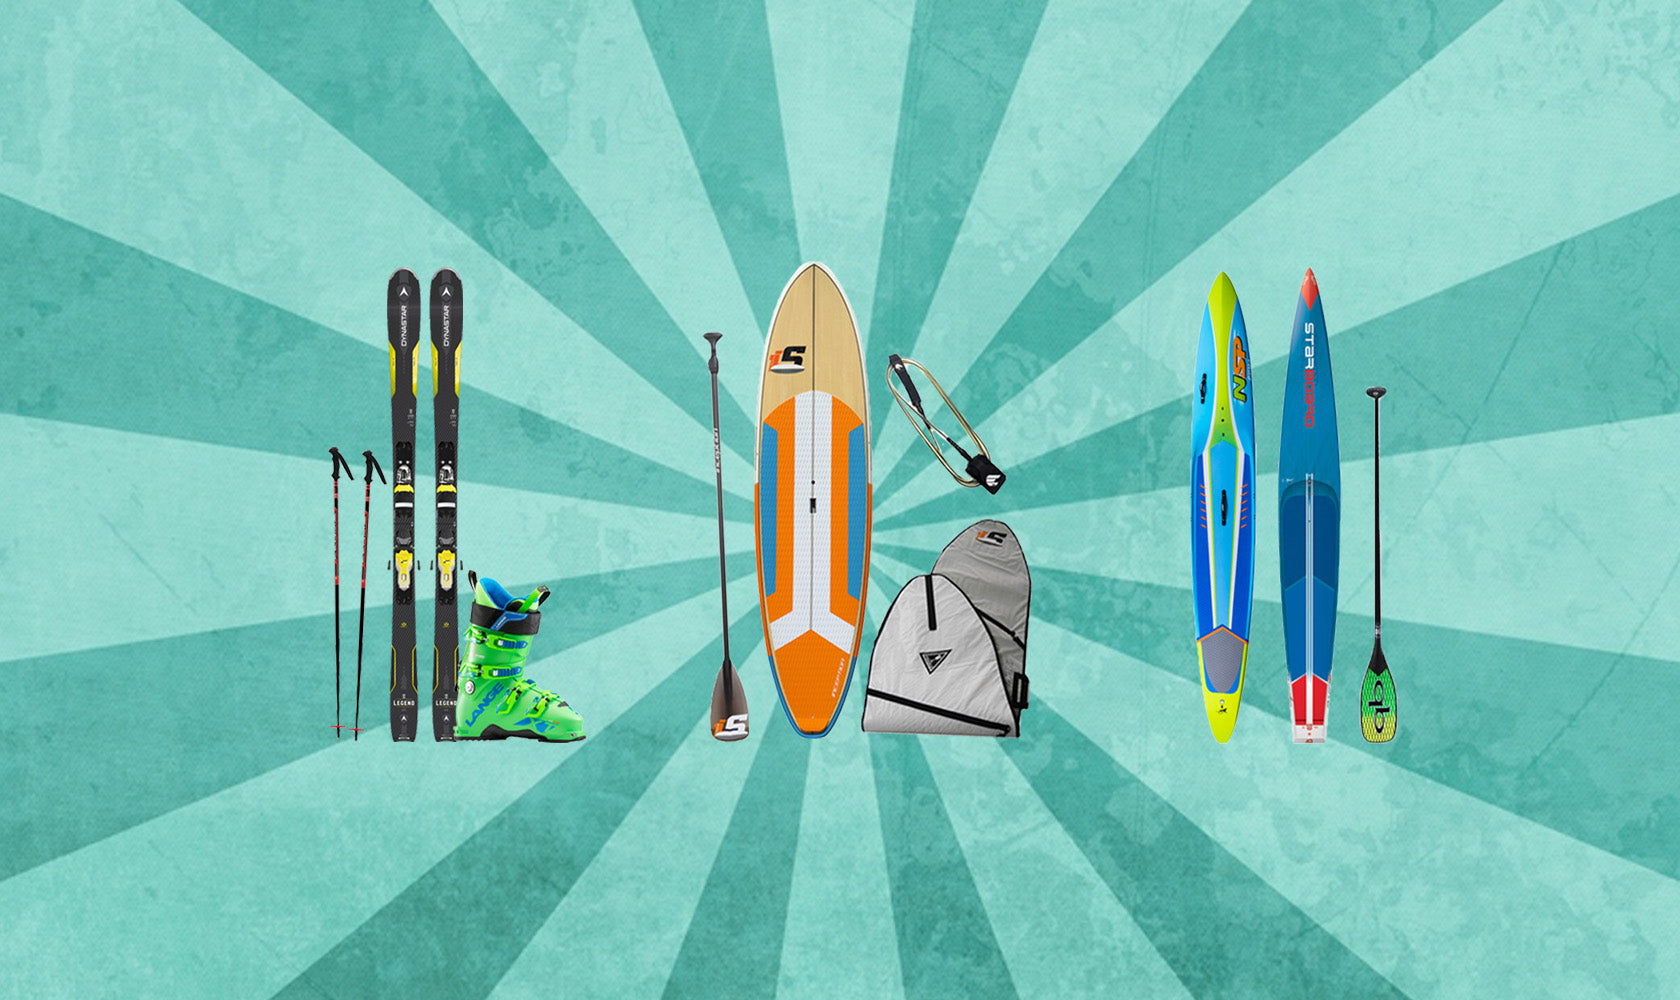 5th Annual Benefit Fundraiser Ski and Paddleboard Sale